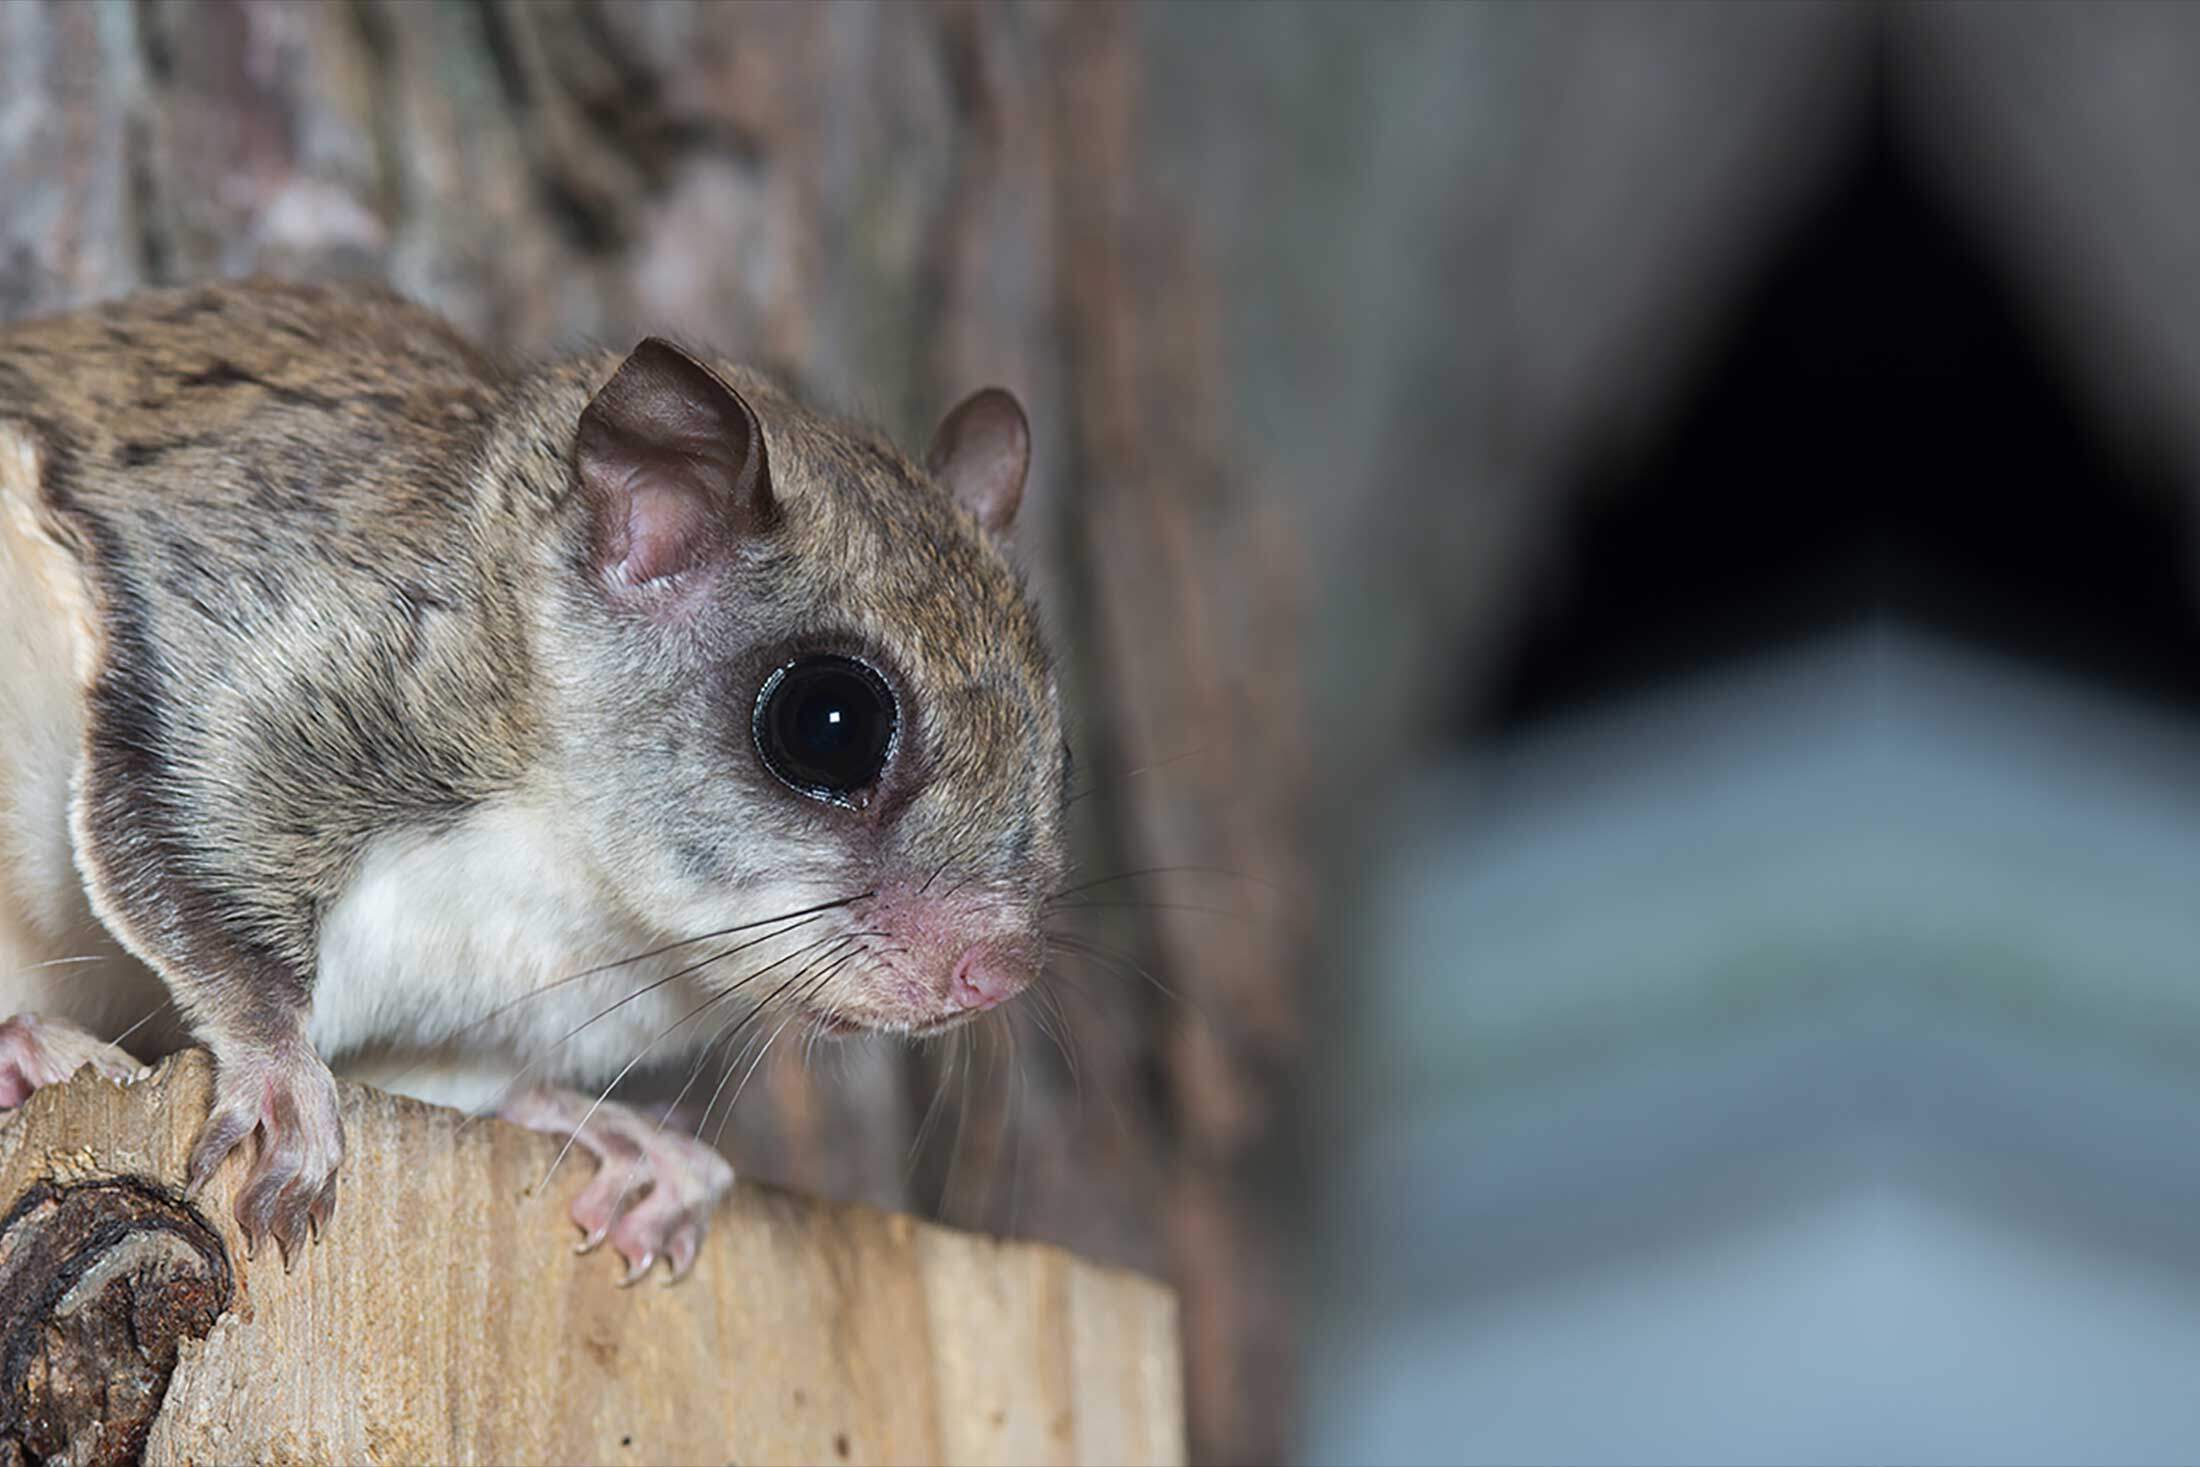 Flying Squirrel Removal in VA - Get Rid of Flying Squirrels in Attic